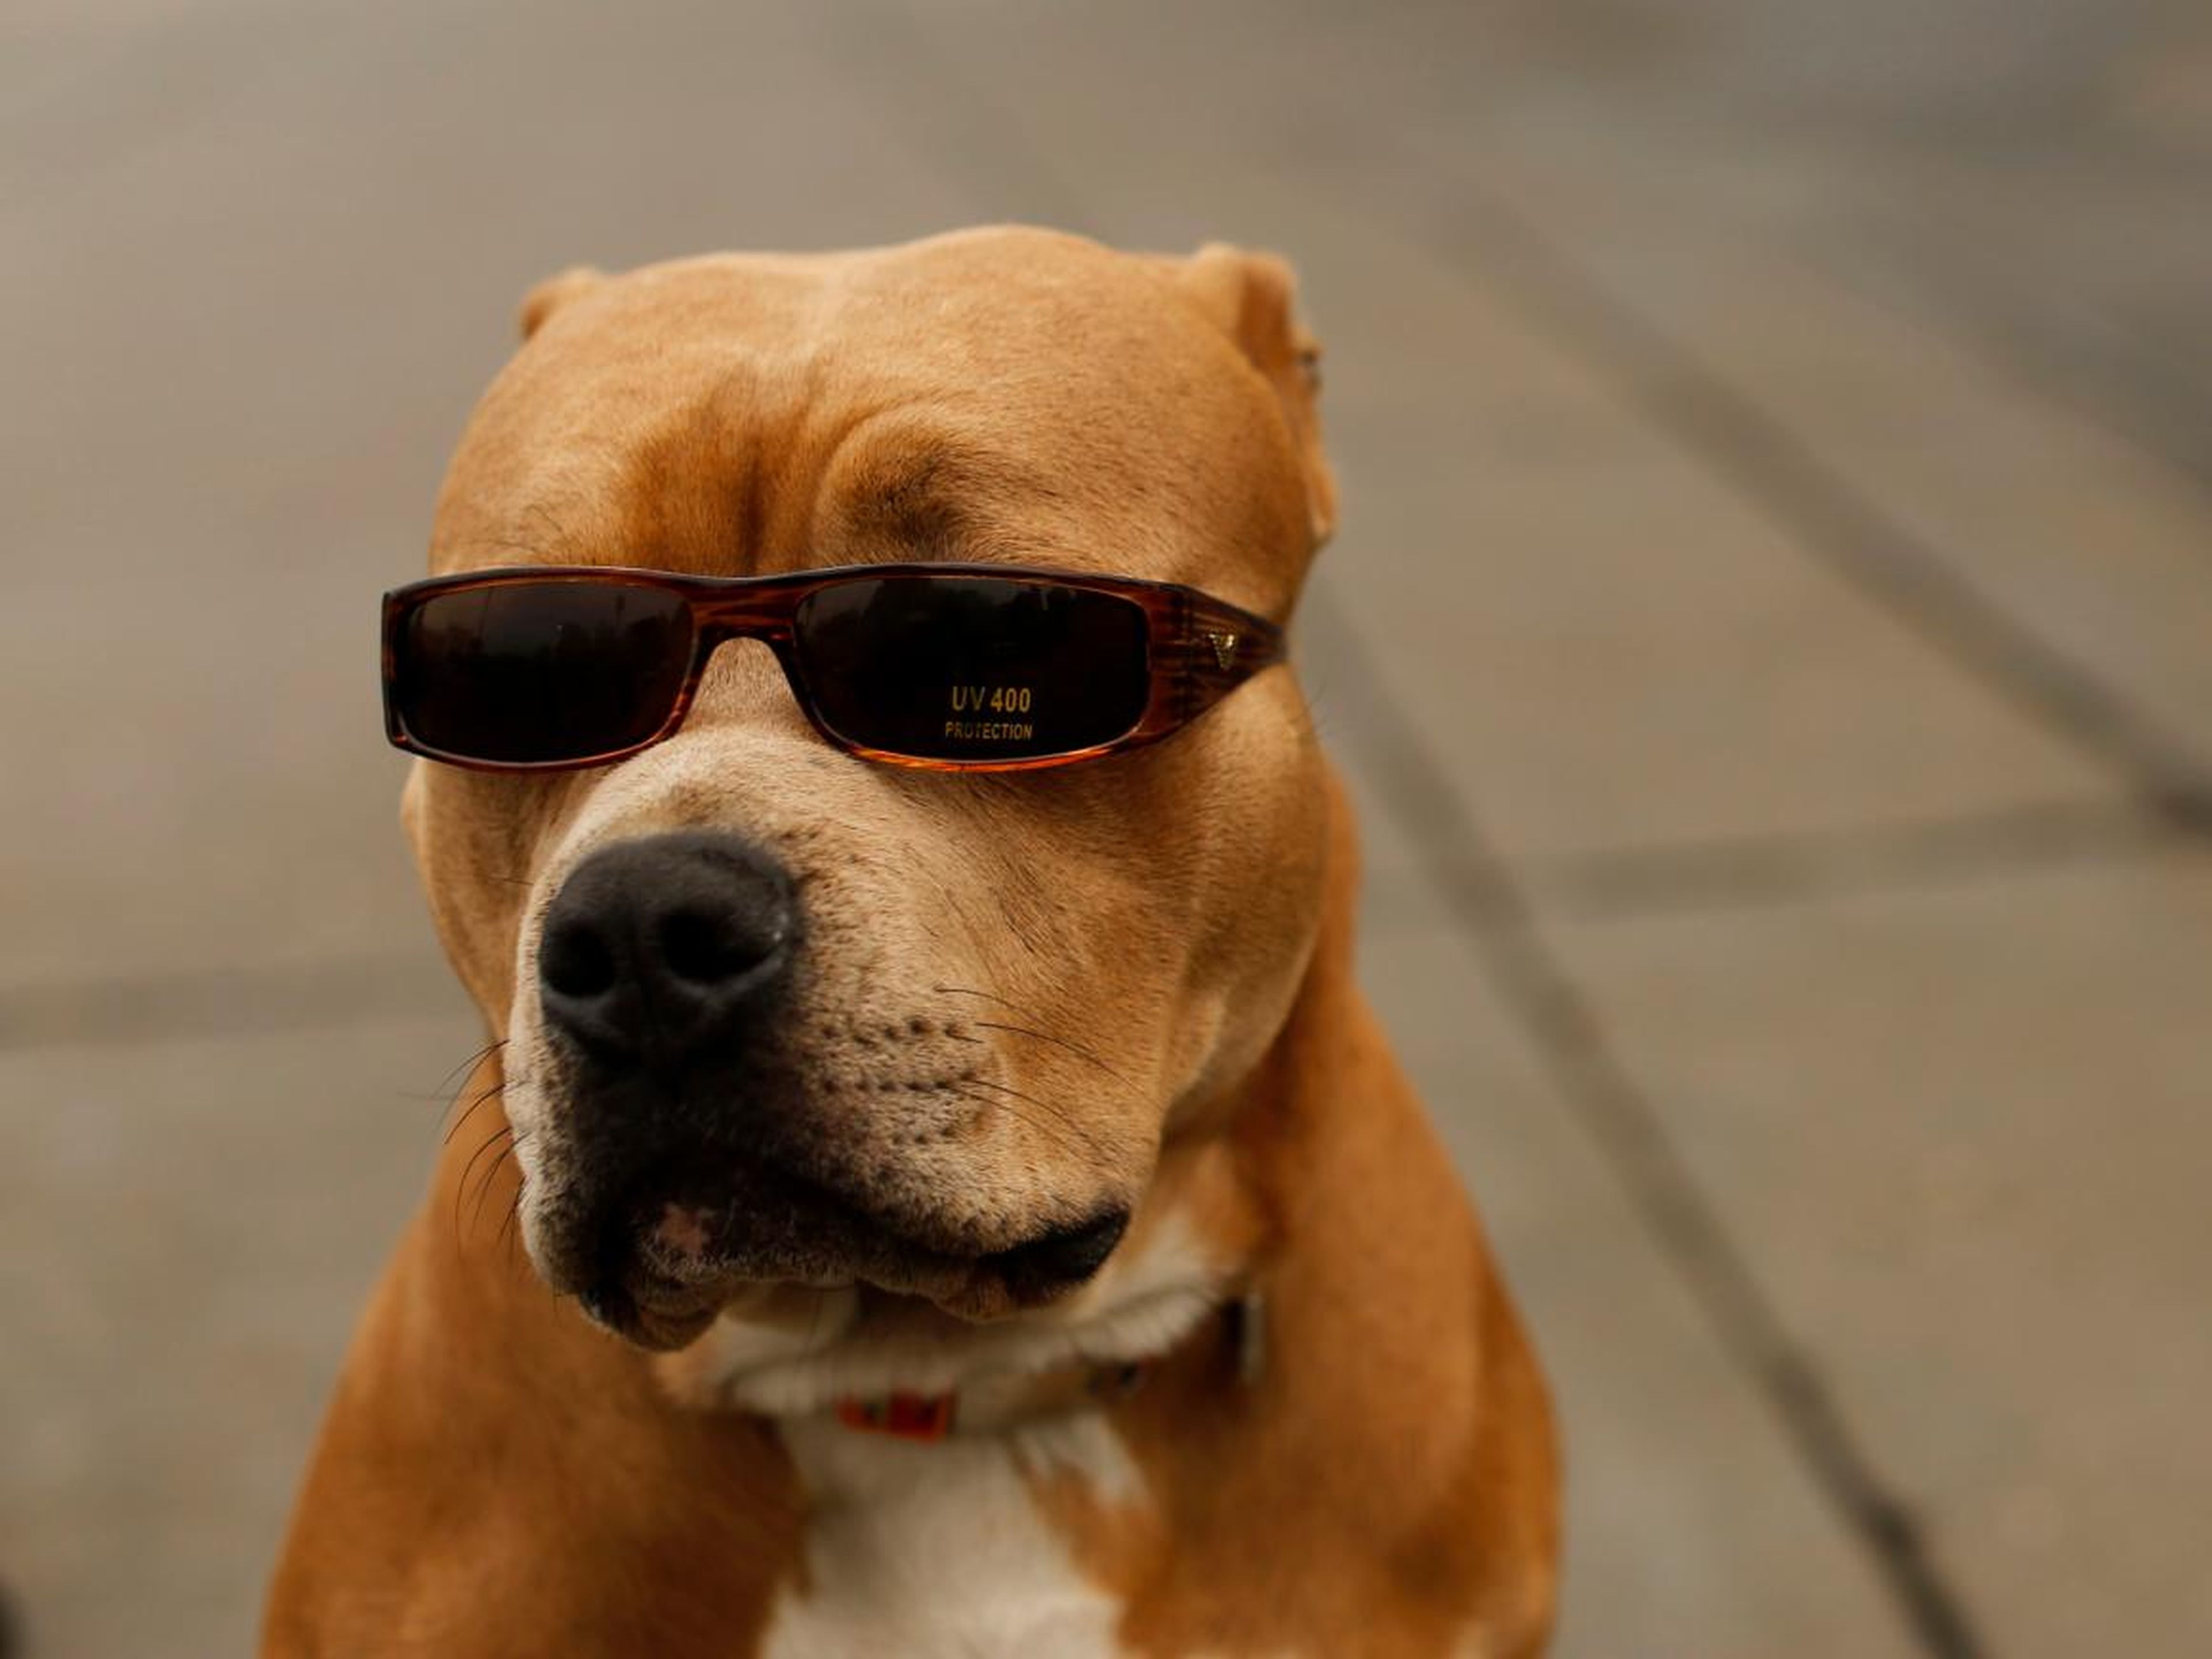 A pit bull dog named OJ wears sunglasses as he stands on the Embarcadero with his owner in San Francisco.